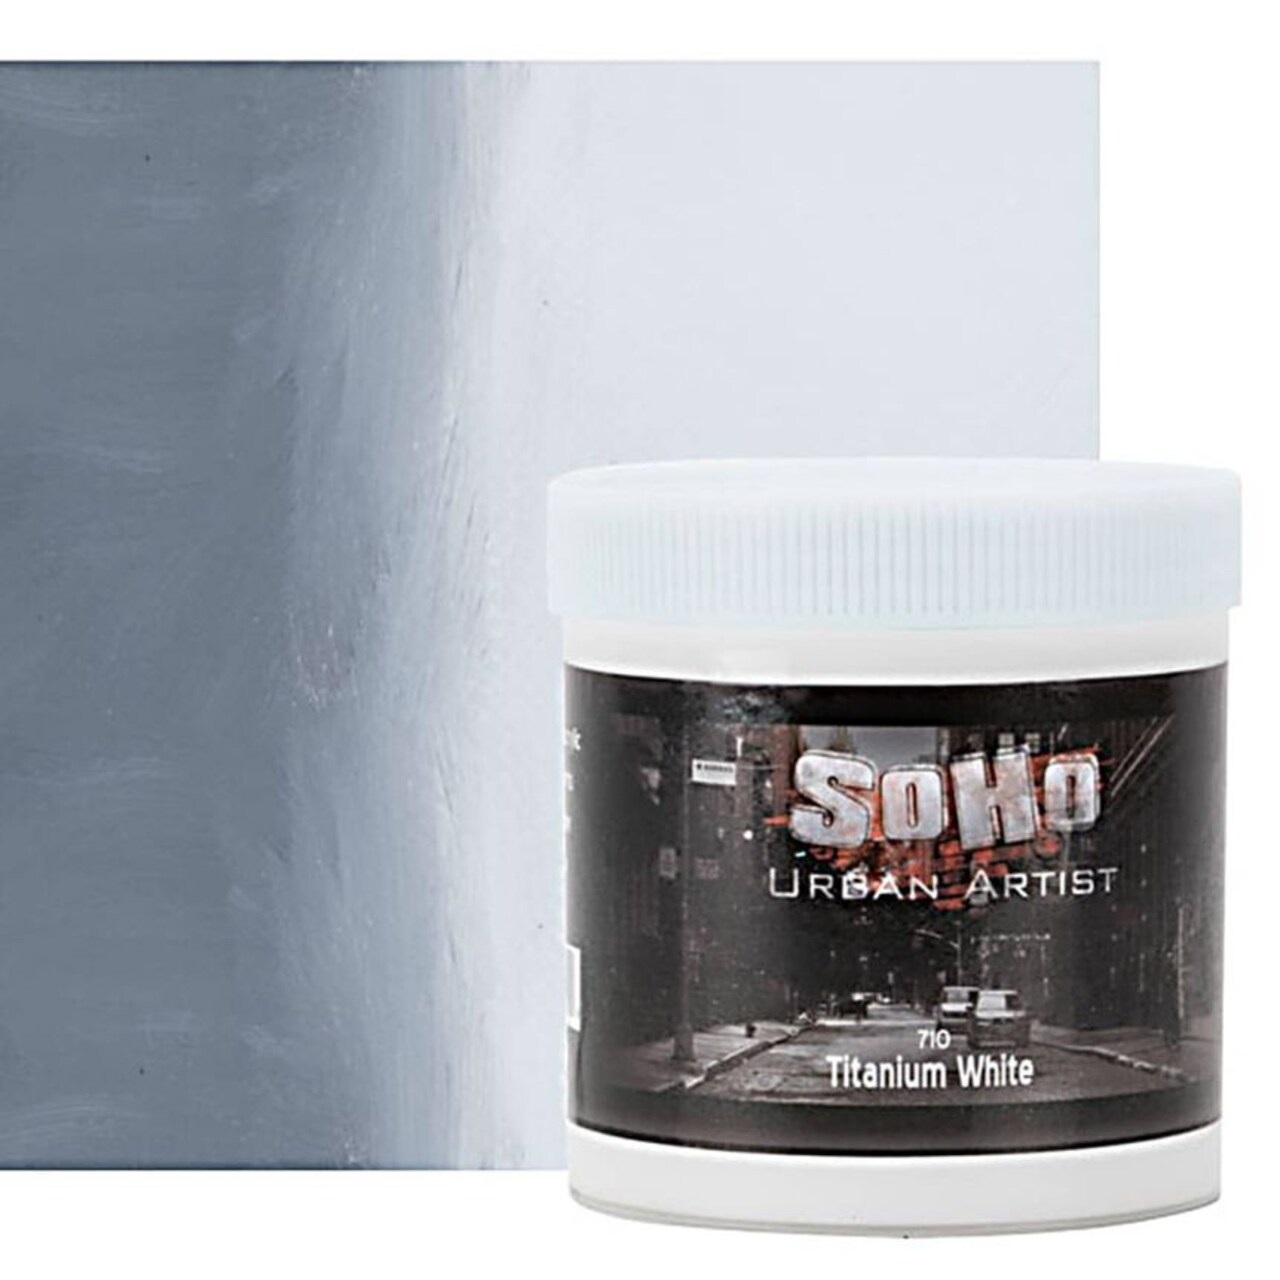 SoHo Urban Artist Acrylic Paint - Thick, Rich, Water-Resistant, Heavy Body Paint